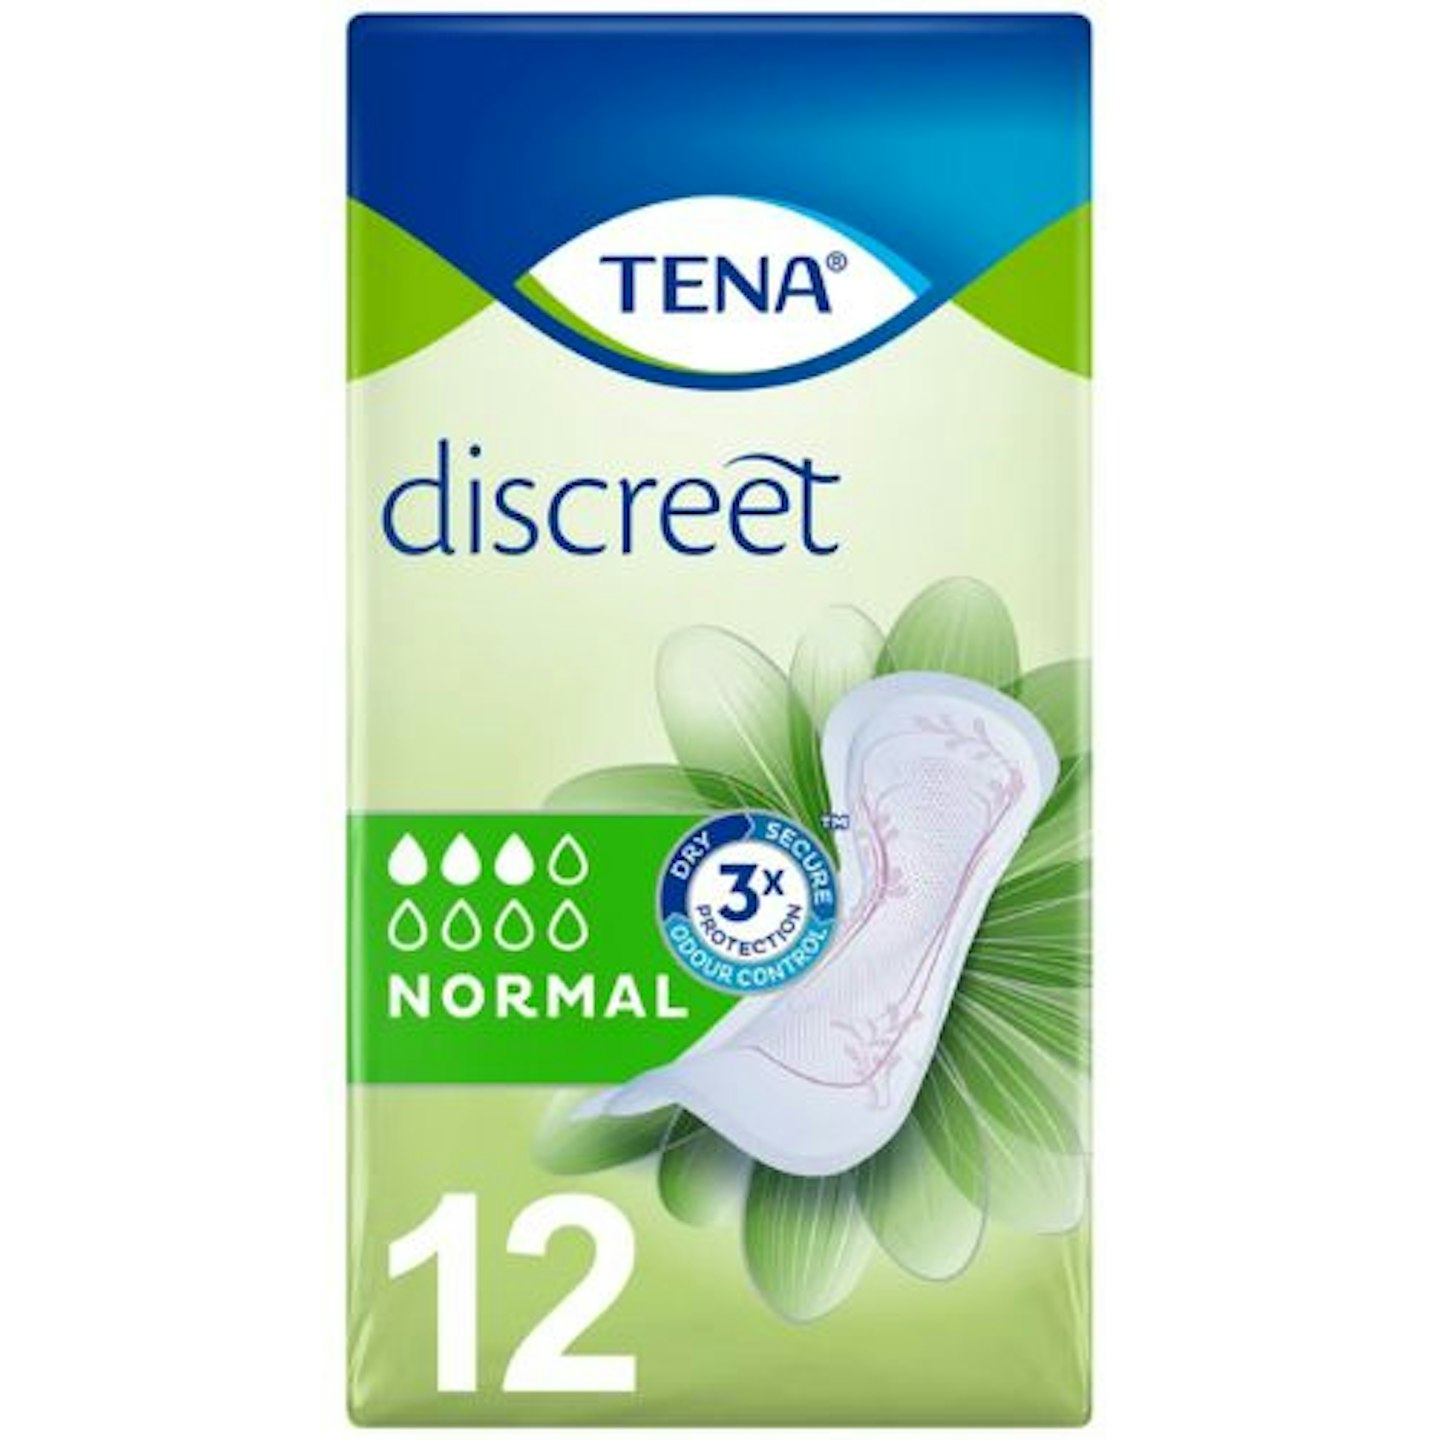 TENA Lady Normal Incontinence Pads - 12 pack